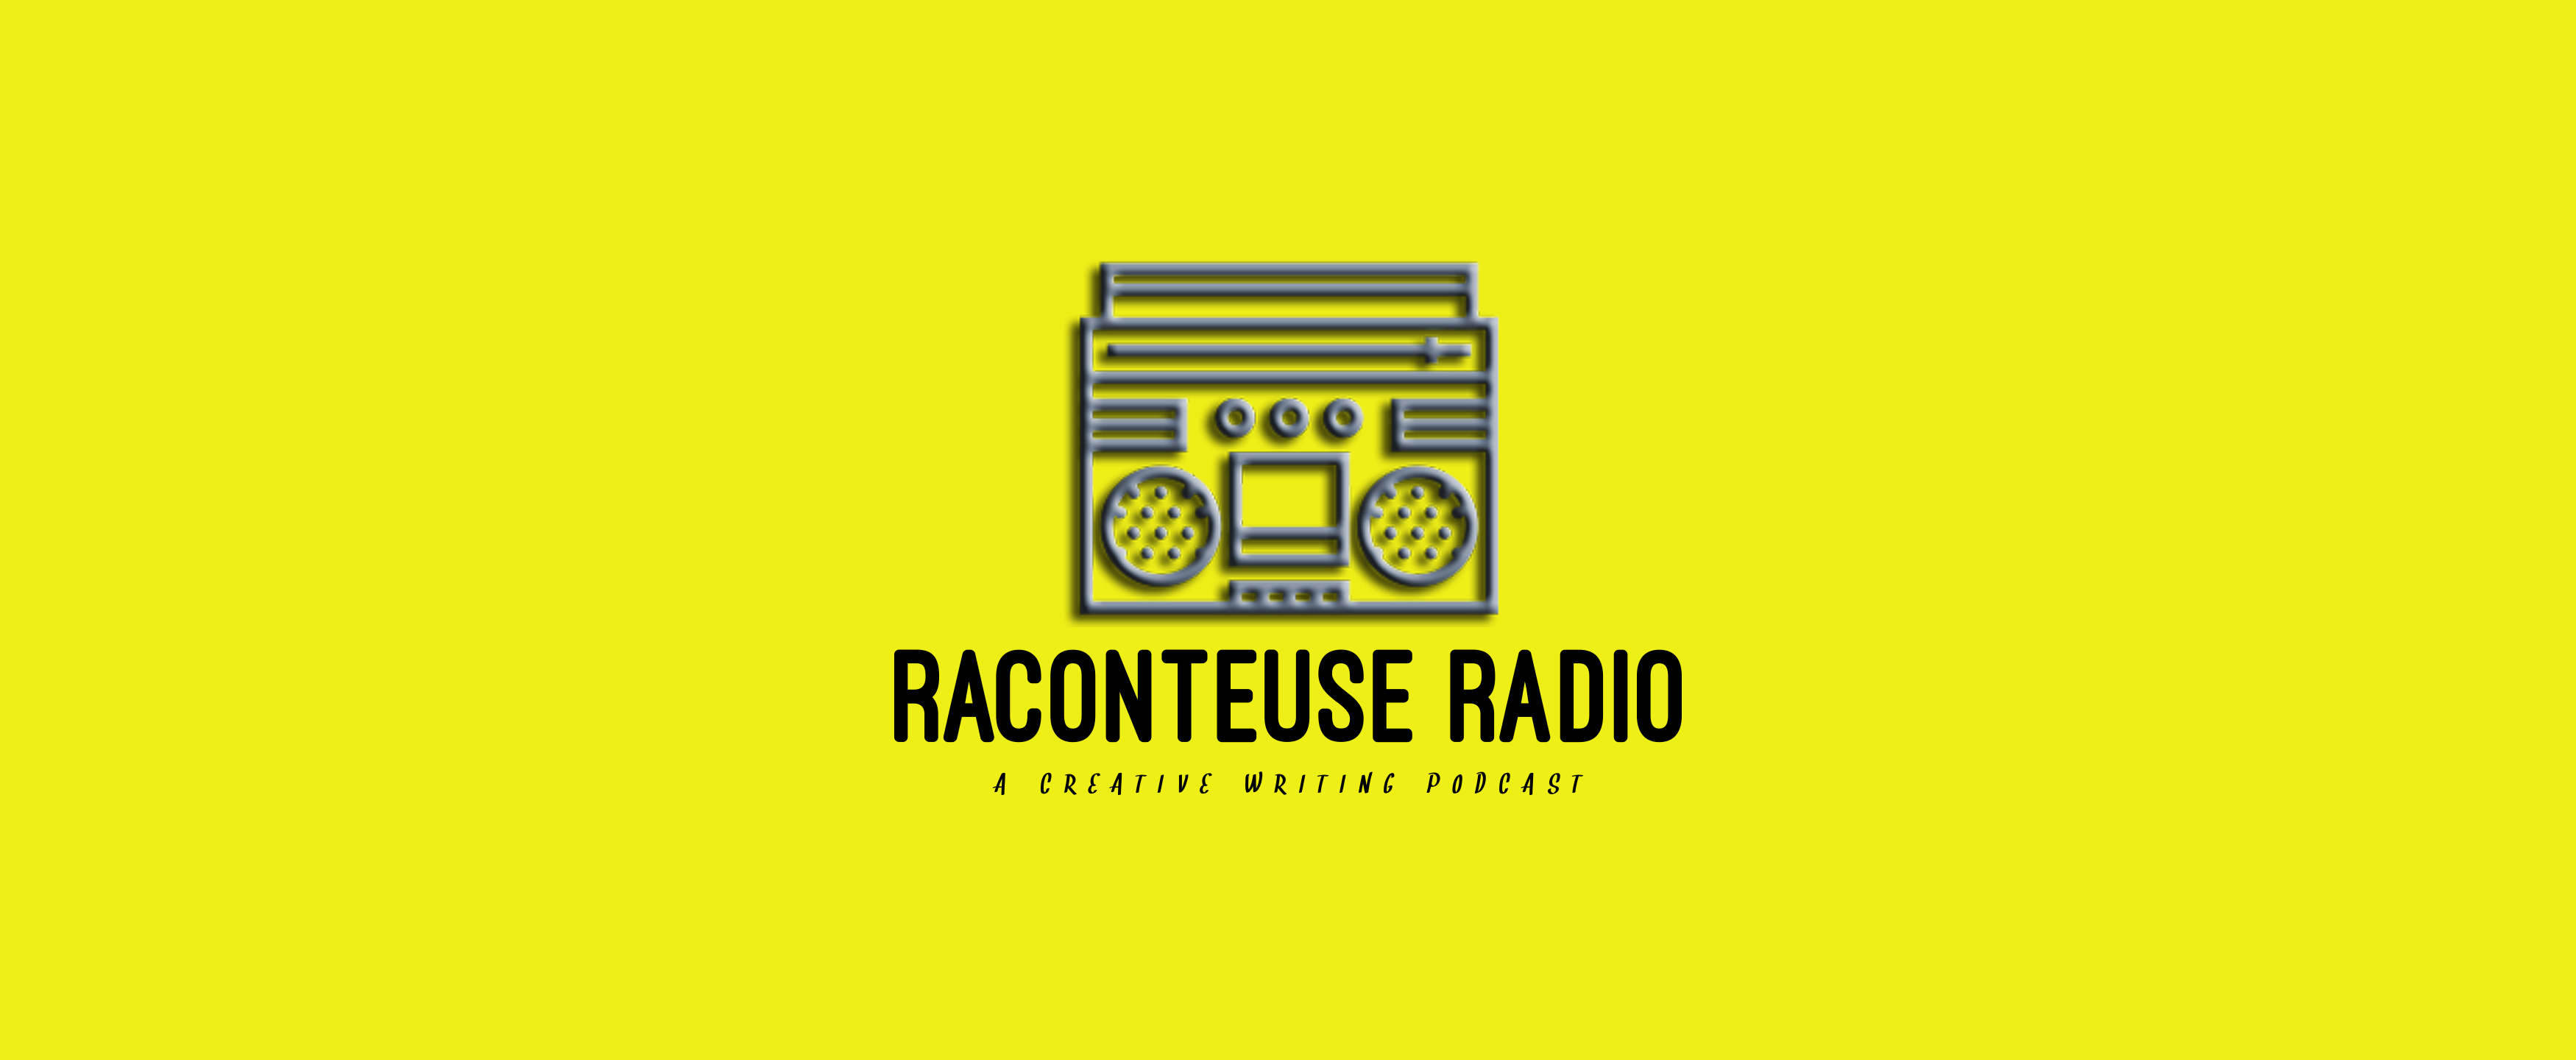 illustration of an outlined black boombox on a yellow background with the text "raconteuse radio: a creative writing podcast" below it